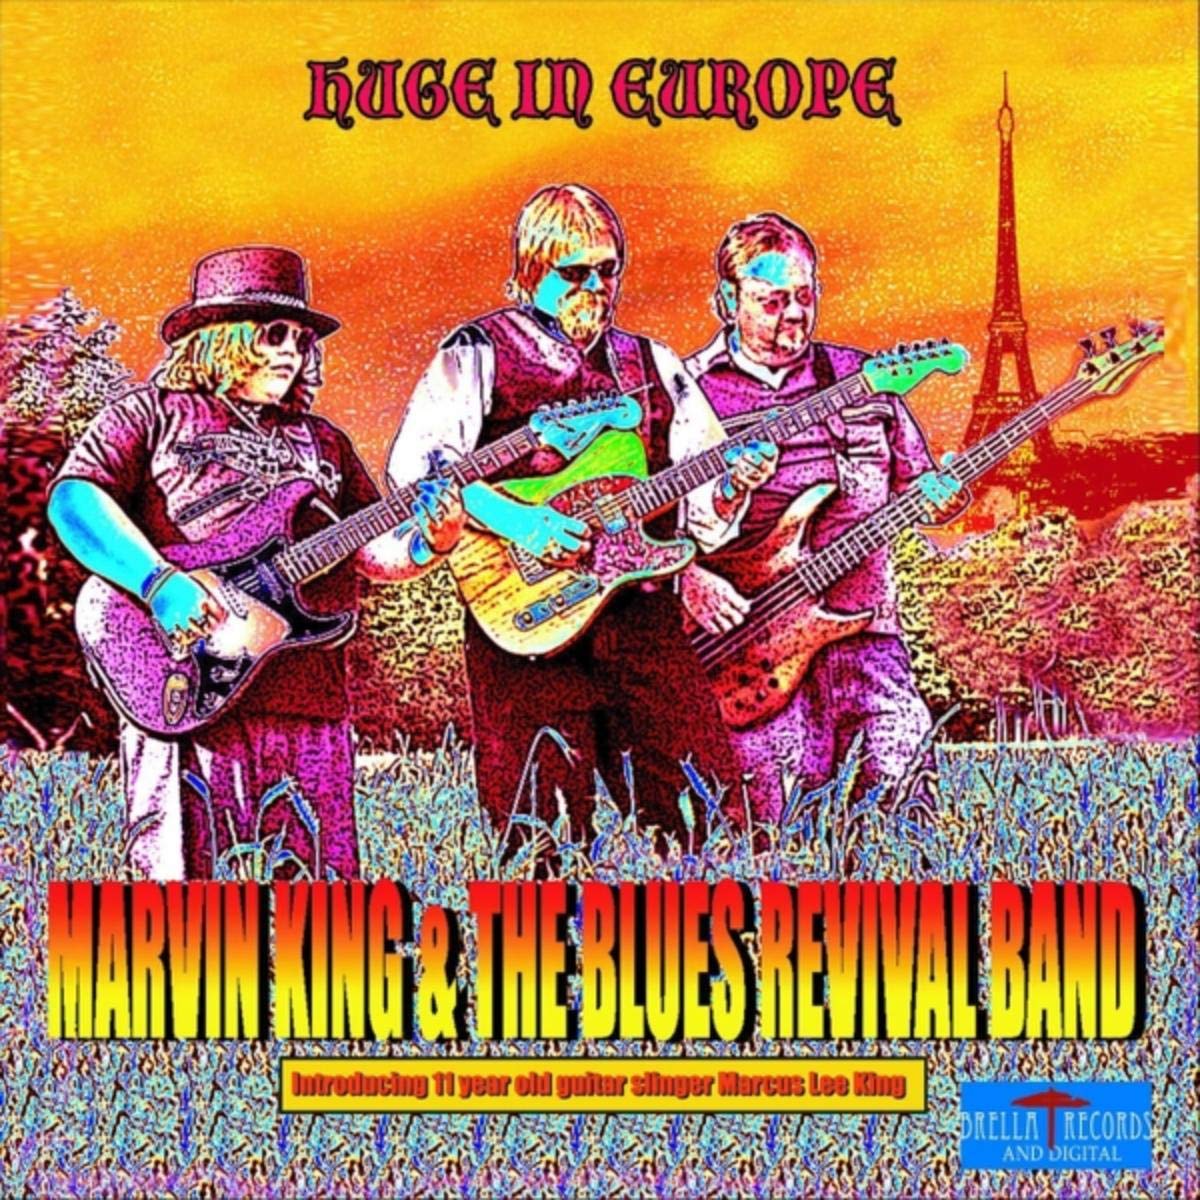 Audio Cd Marvin King And The Blues Revival Band - Huge In Europe (Feat. Marcus Lee King) NUOVO SIGILLATO, EDIZIONE DEL 14/11/2018 SUBITO DISPONIBILE